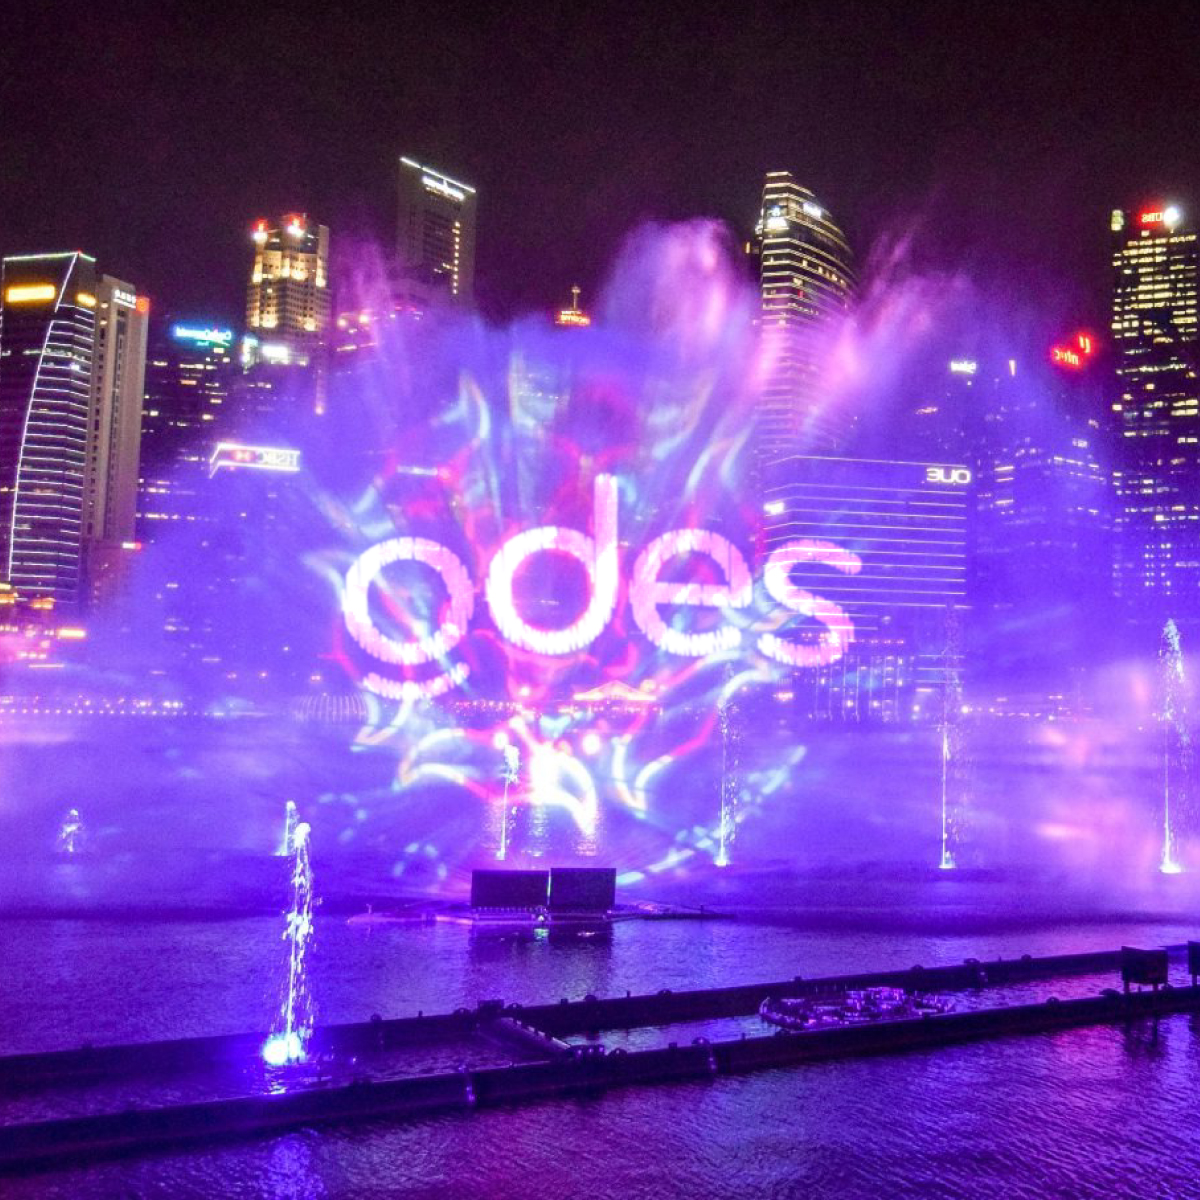 ODES provides every business a chance to shine with optimum digitization for their growth needs in this fast-moving world. Minimize losing opportunities and maximize teamwork alongside ODES. 
Join McCoy ODES right now, and get 80% EDG Grant.  
#odes #mccoyodes #McCoy #automation https://t.co/XrjhJekgSB